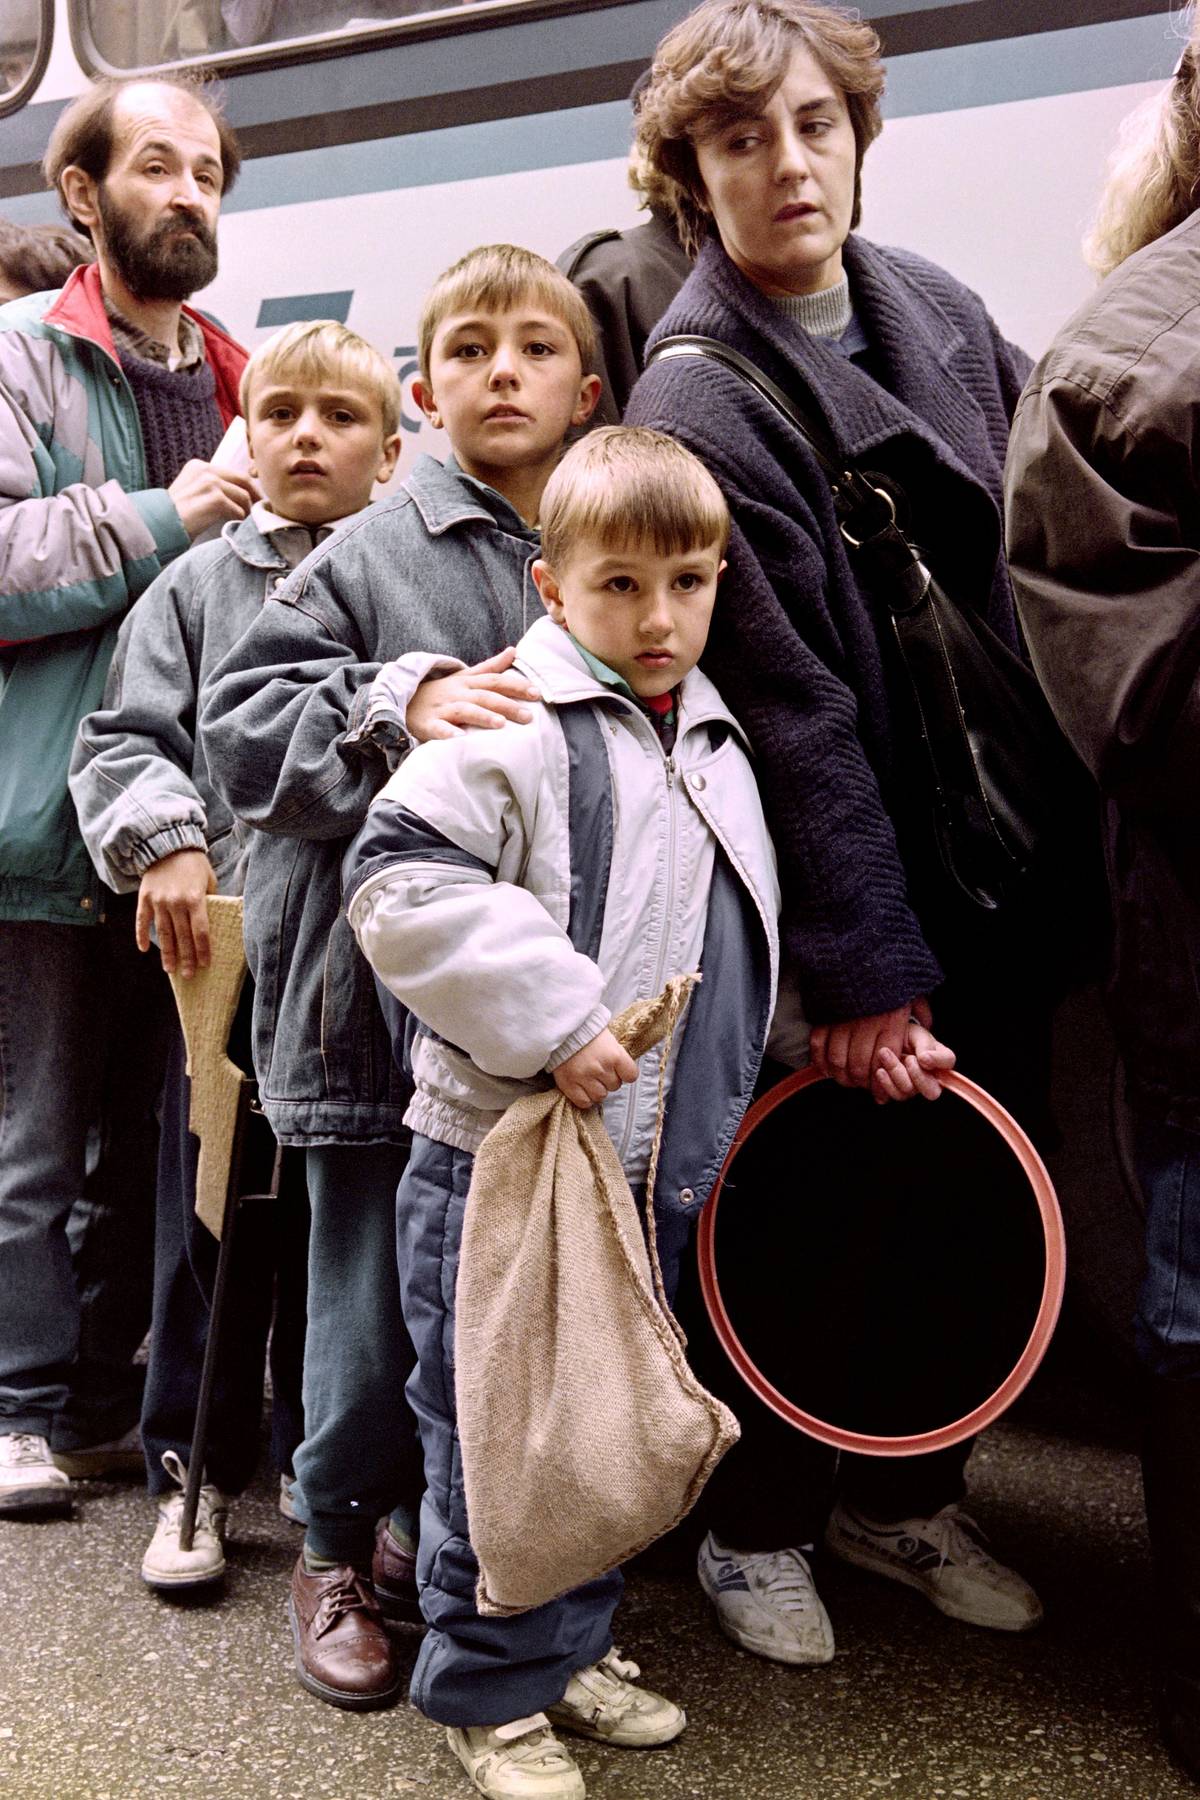 A Bosnian Jewish family boards a bus leaving Sarajevo, November 14, 1992. Some 200 Jews left Sarajevo for Split in a convoy organized by an American Jewish association. (Patrick Baz/AFP/Getty Images)